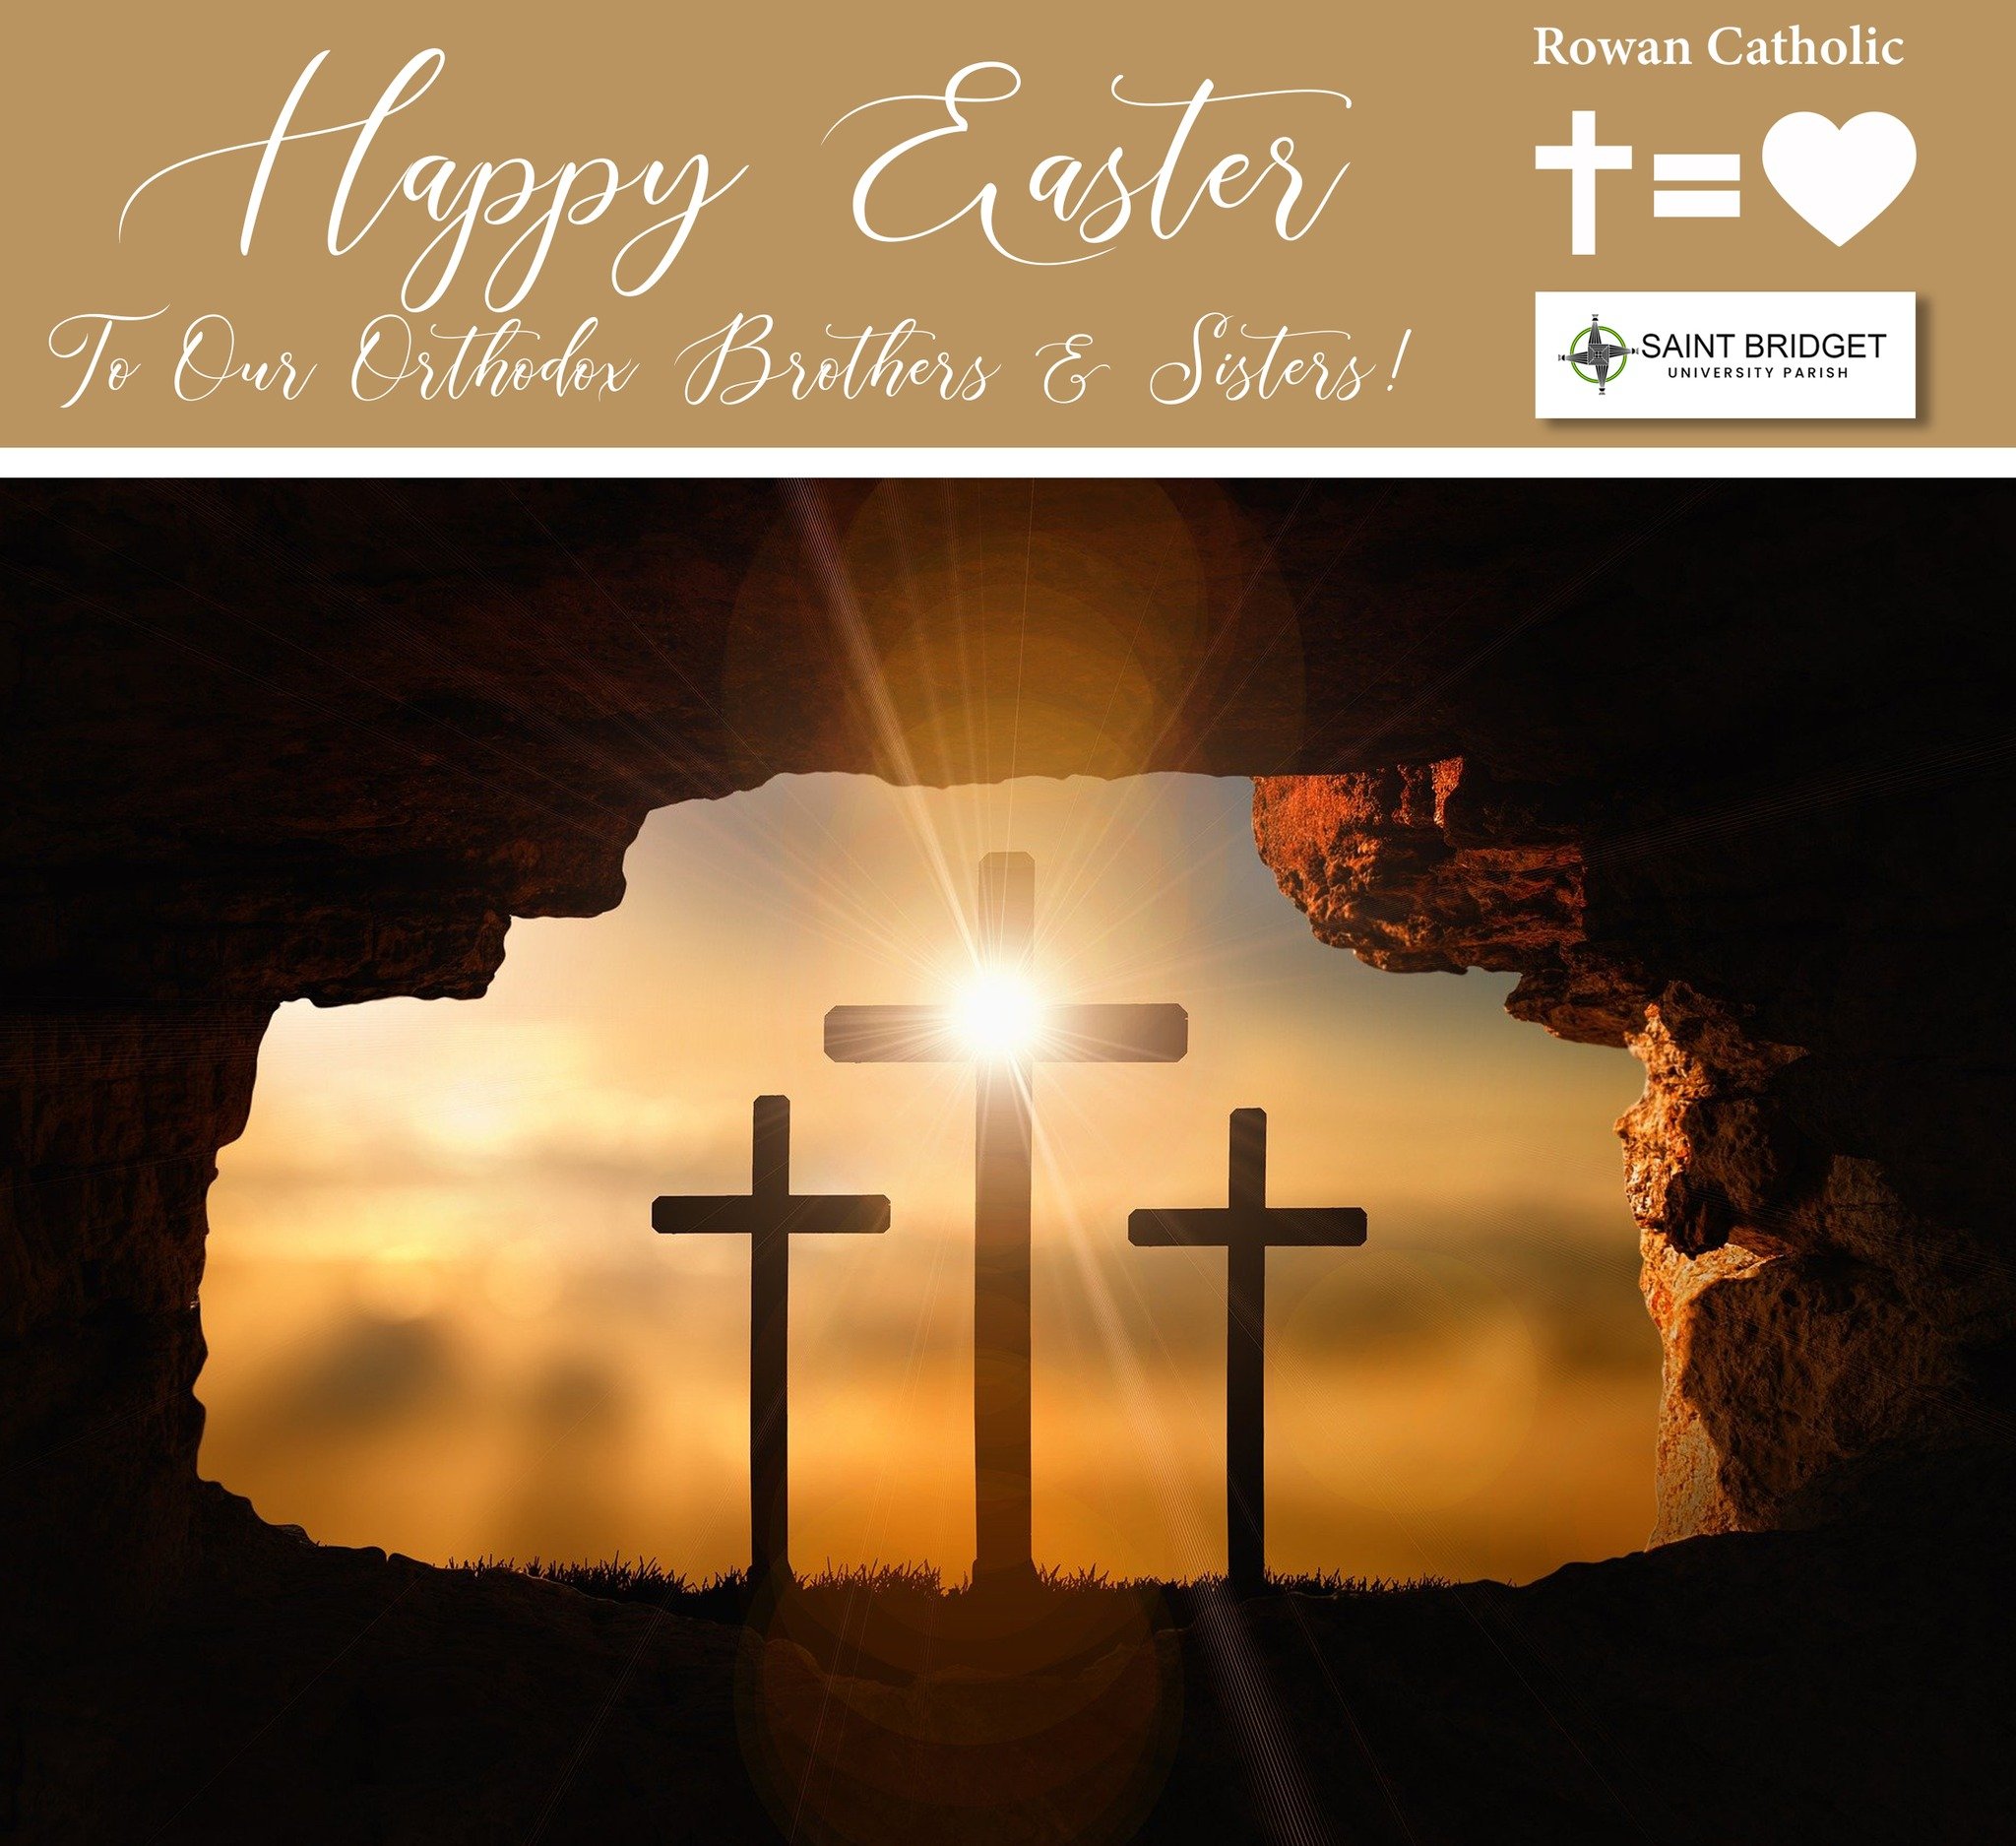 We wish a very happy &amp; blessed Easter Sunday to our Orthodox bothers &amp; sisters!

#stbridgetuniversityparish #newman #rowancatholic #eastersunday